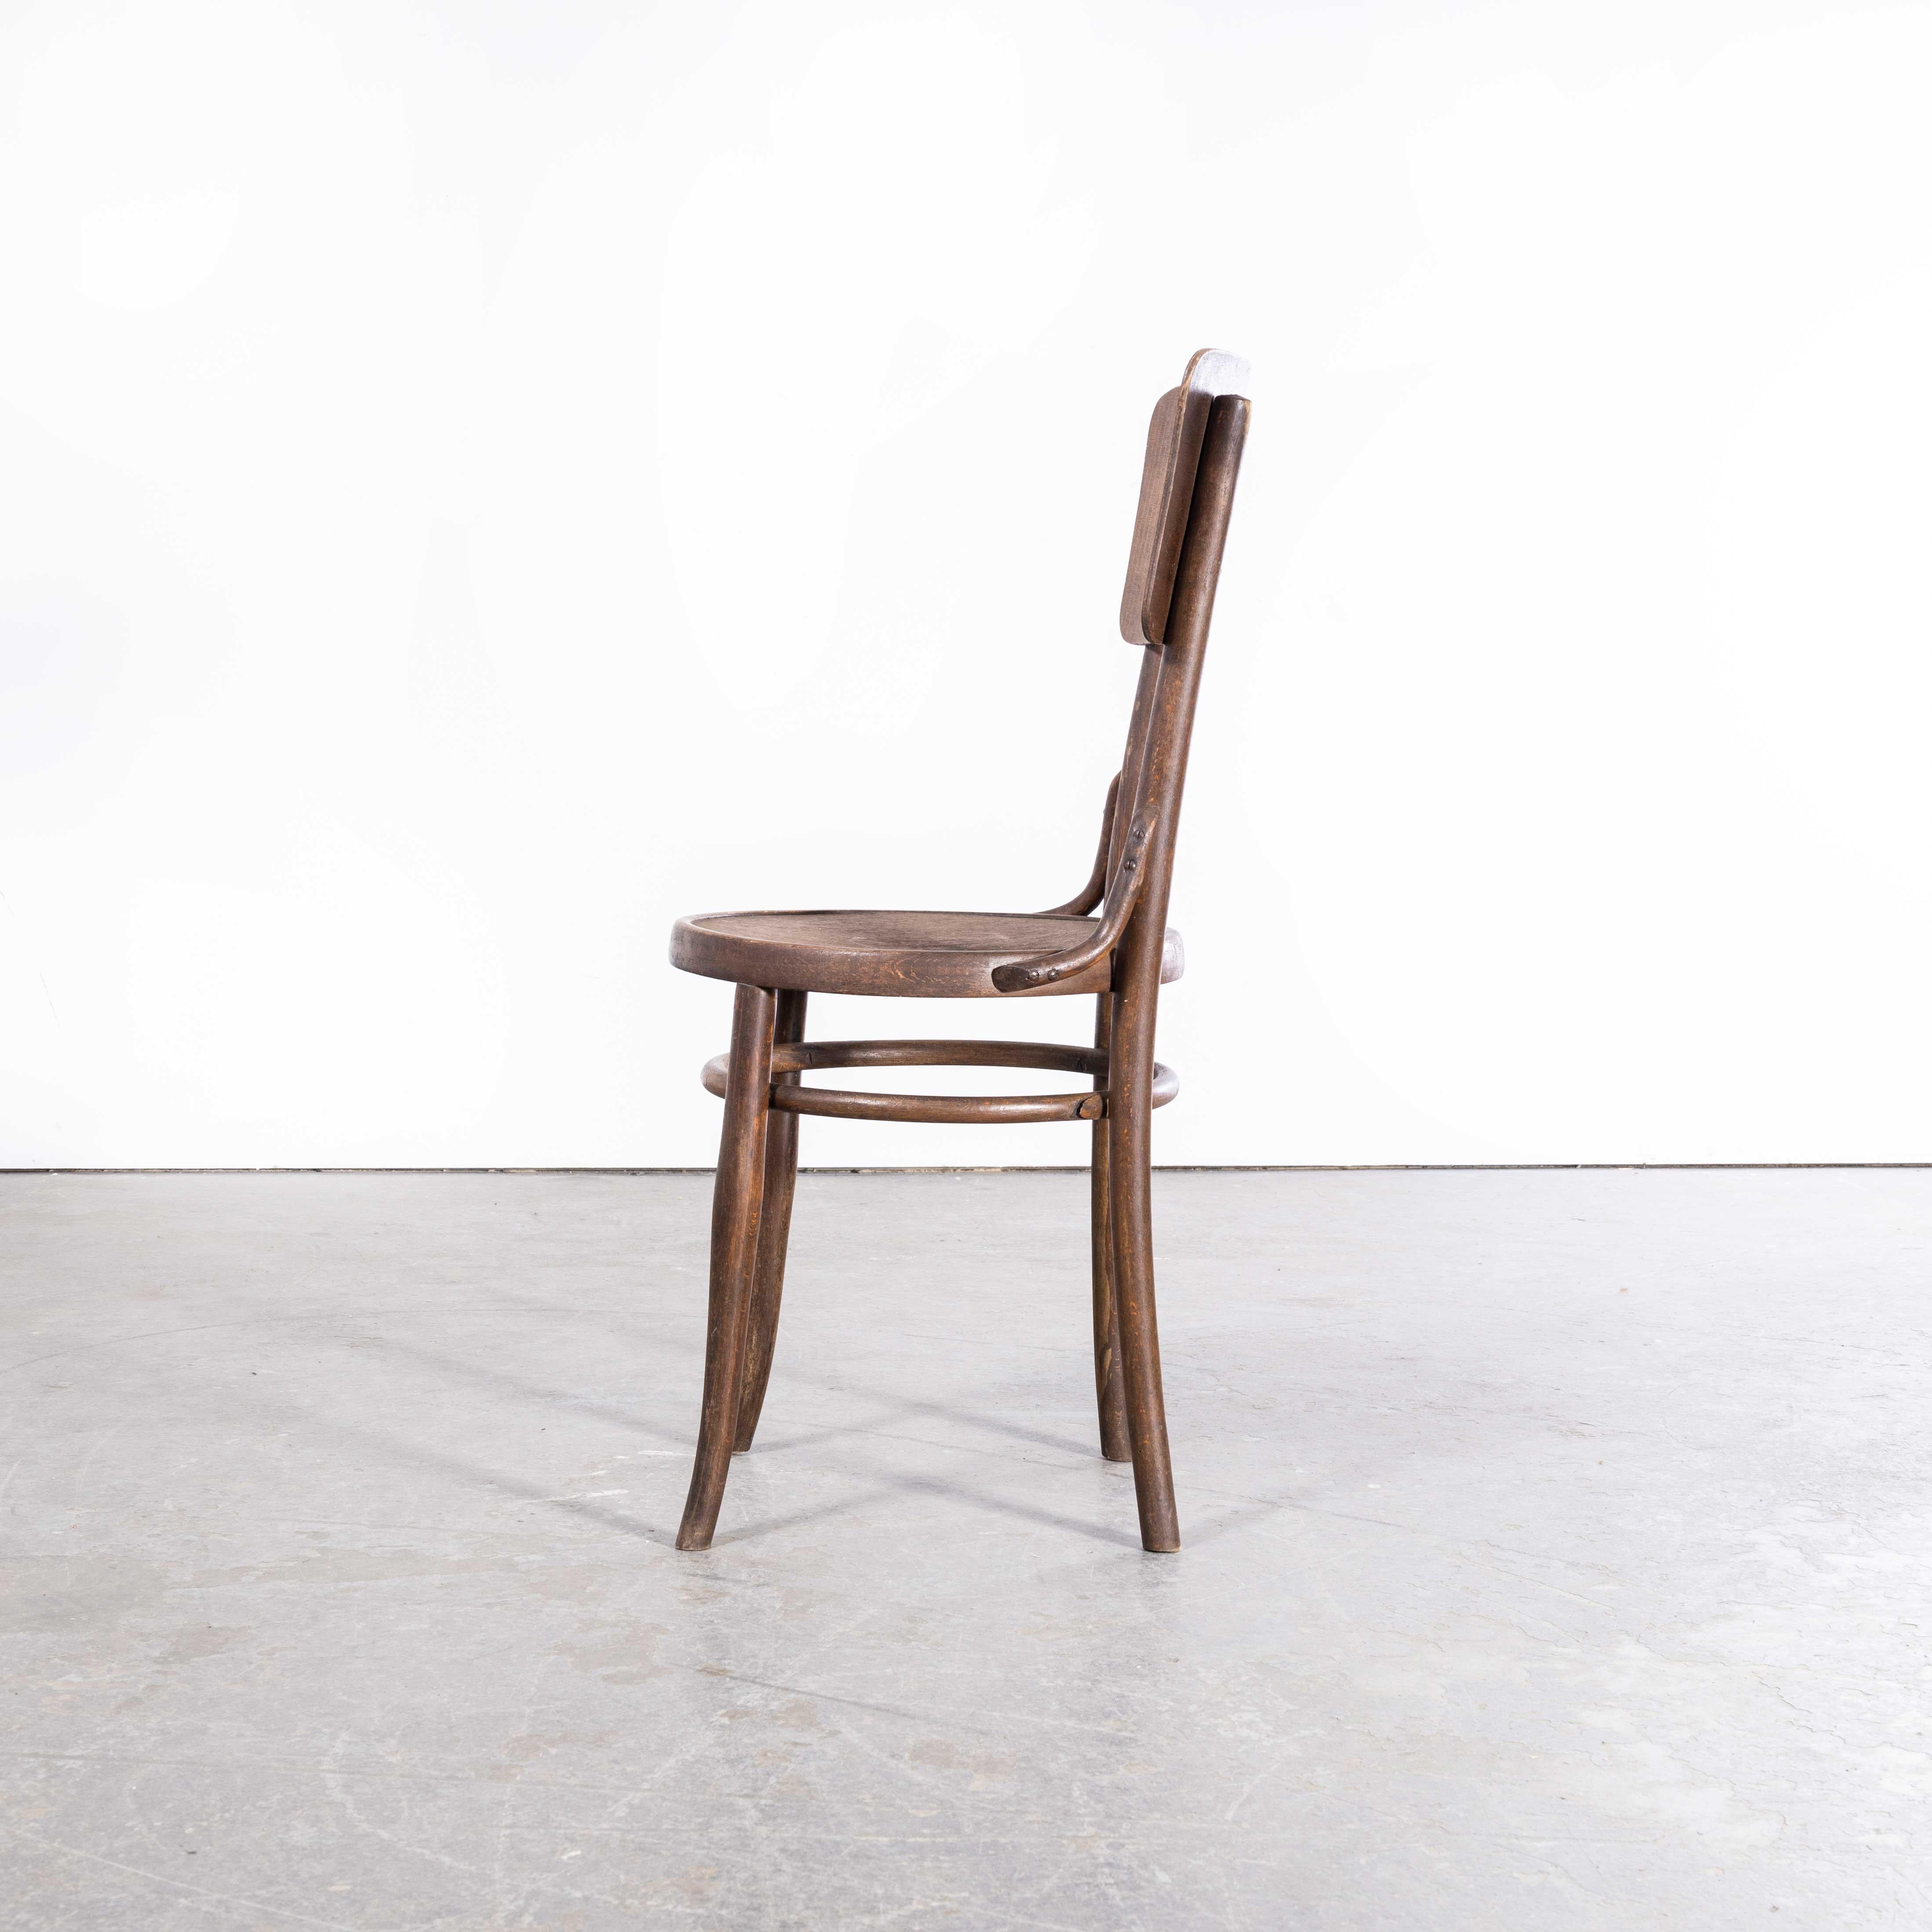 1940s Bentwood Debrecen Walnut Dining Chair
1940s Bentwood Debrecen Walnut Dining Chairs. It is hard to be precise about the origin of this chair as little history is known, but what we do know is at the beginning of the 20th century two producers